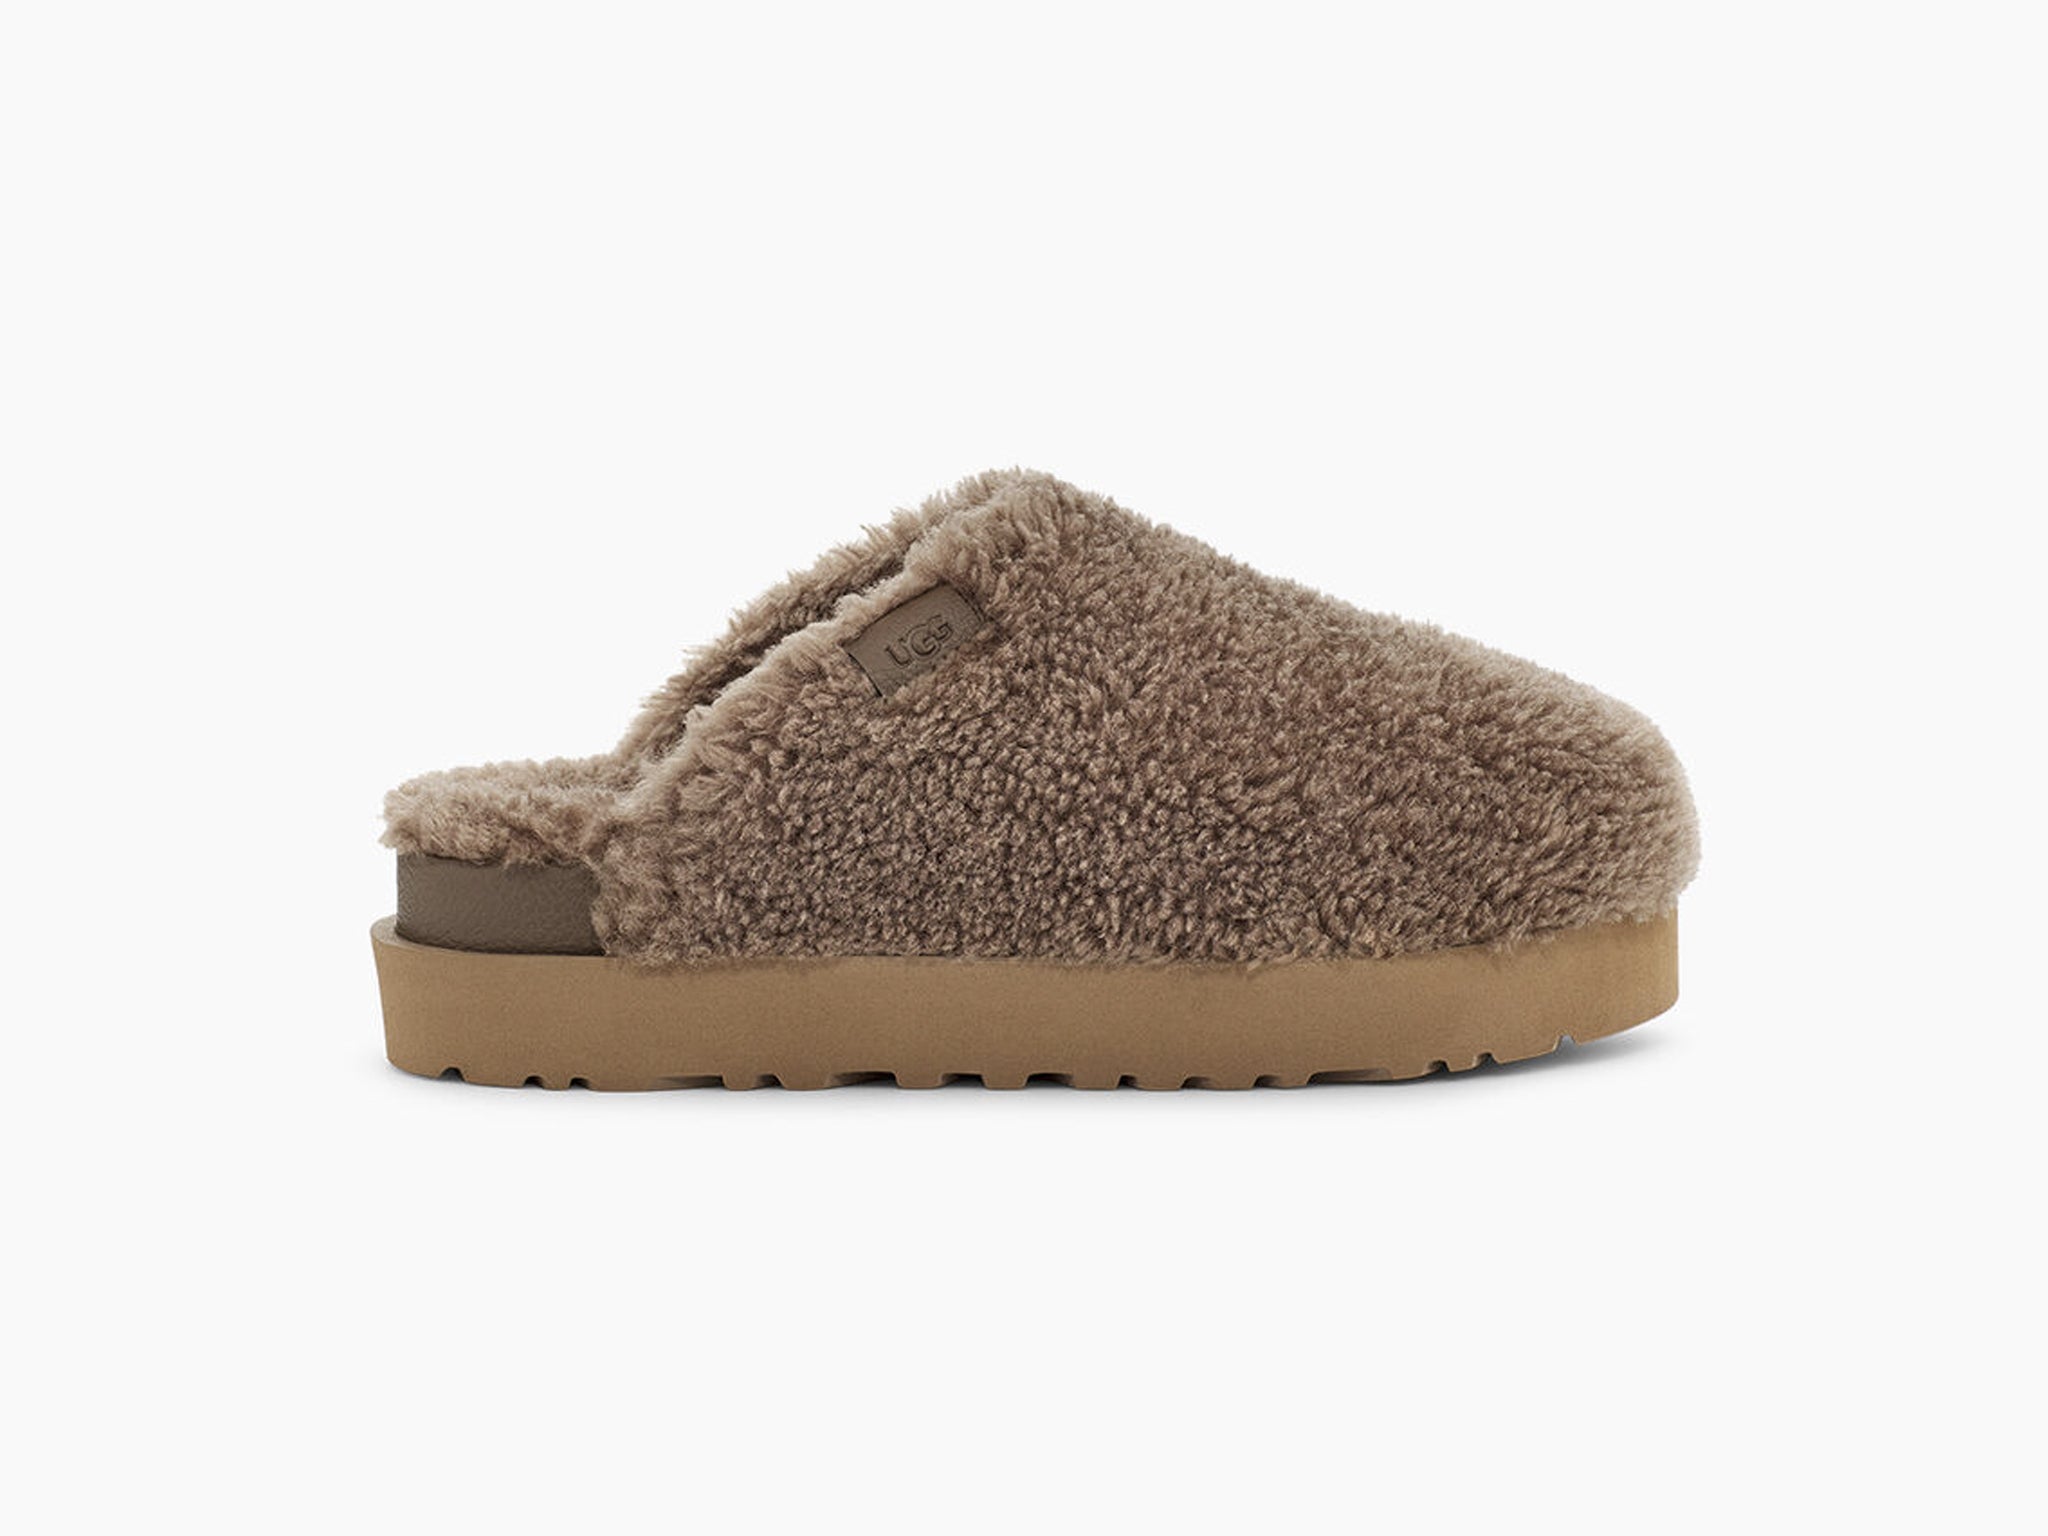 Best slippers for women 2022: Comfy styles from Ugg sliders to sheepskin designs The Independent